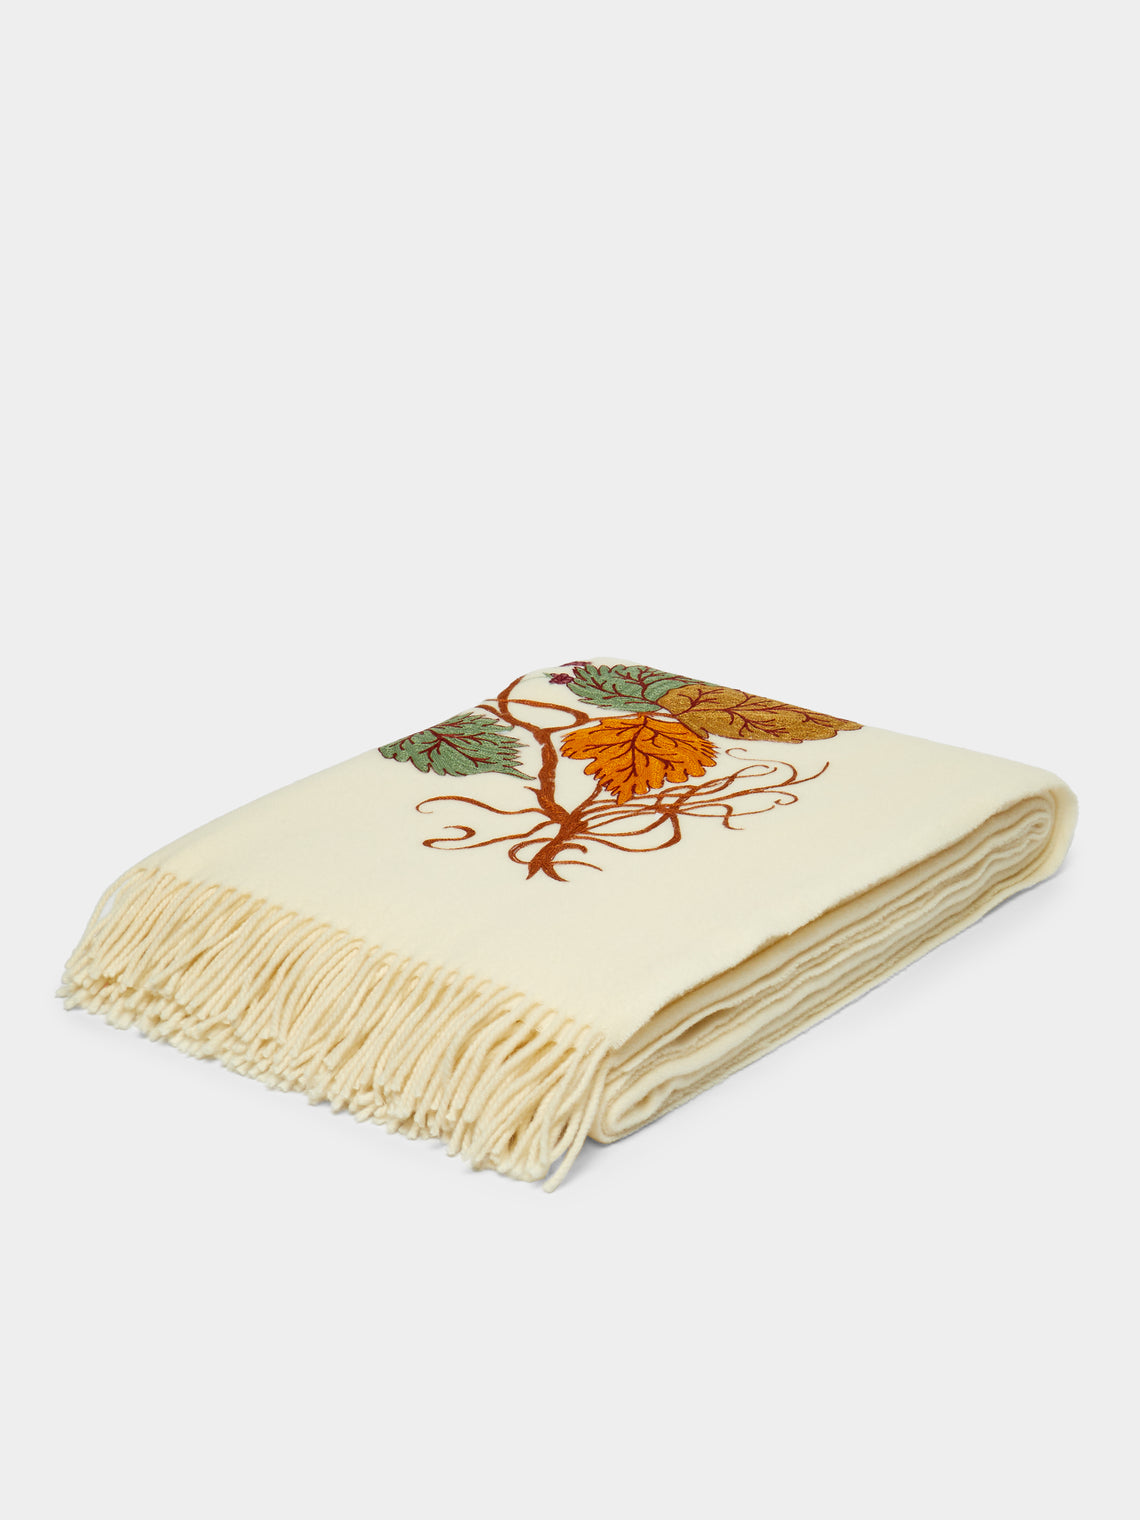 Loretta Caponi - Autumn Hand-Embroidered Wool Blanket -  - ABASK